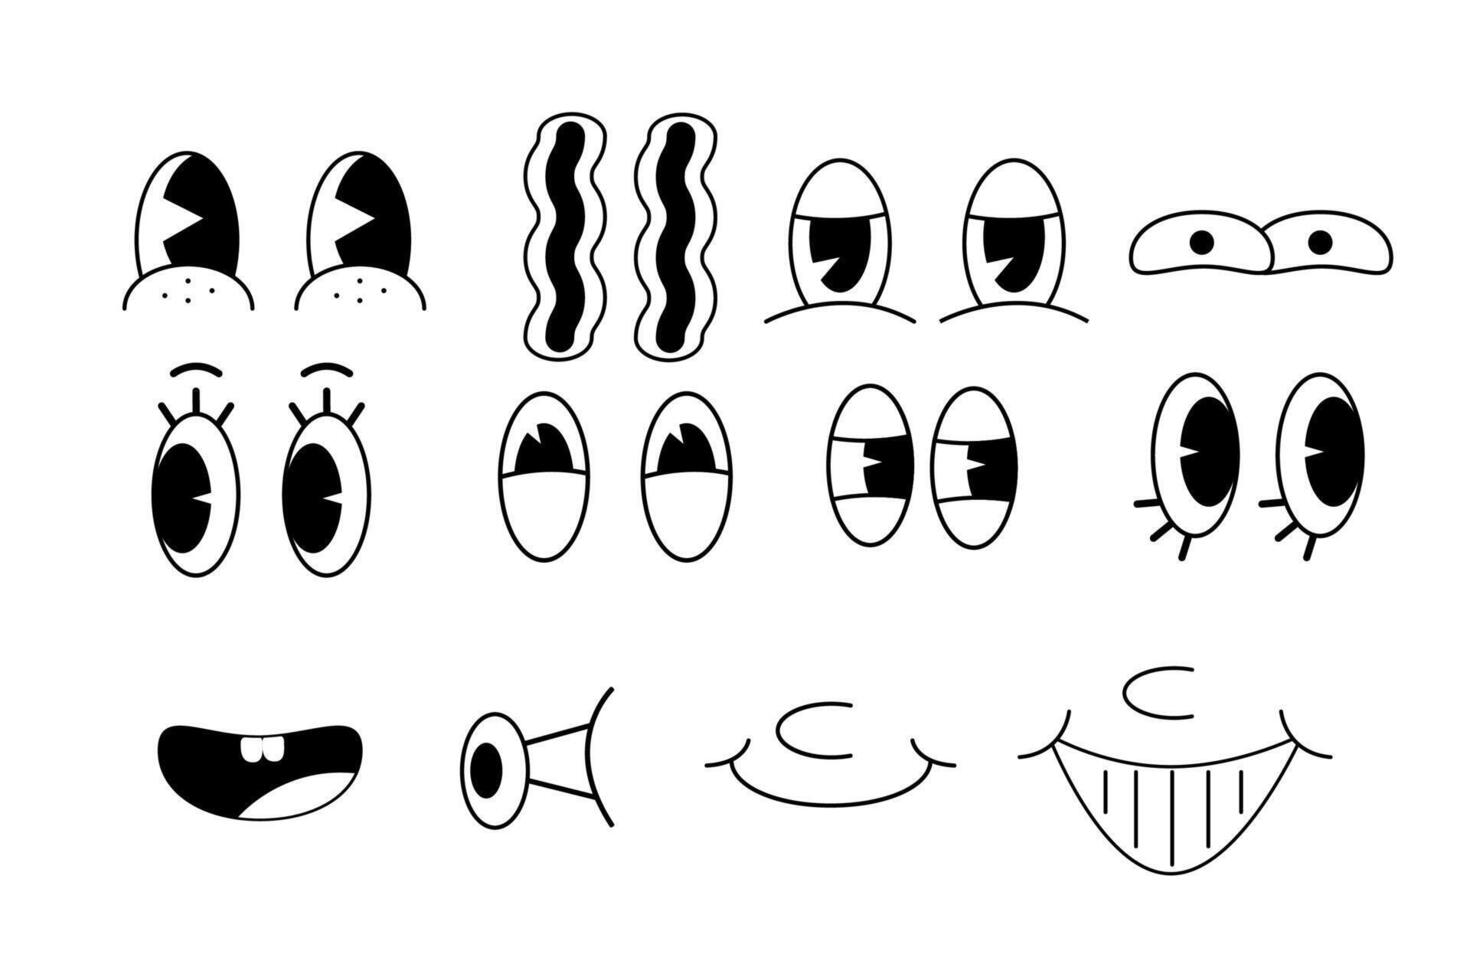 Y2K aesthetics, retro cartoon mascot characters funny faces. Old animation eyes and mouths elements. Vintage comic smile for logo set. Smiley caricatures with happy and cheerful emotions vector